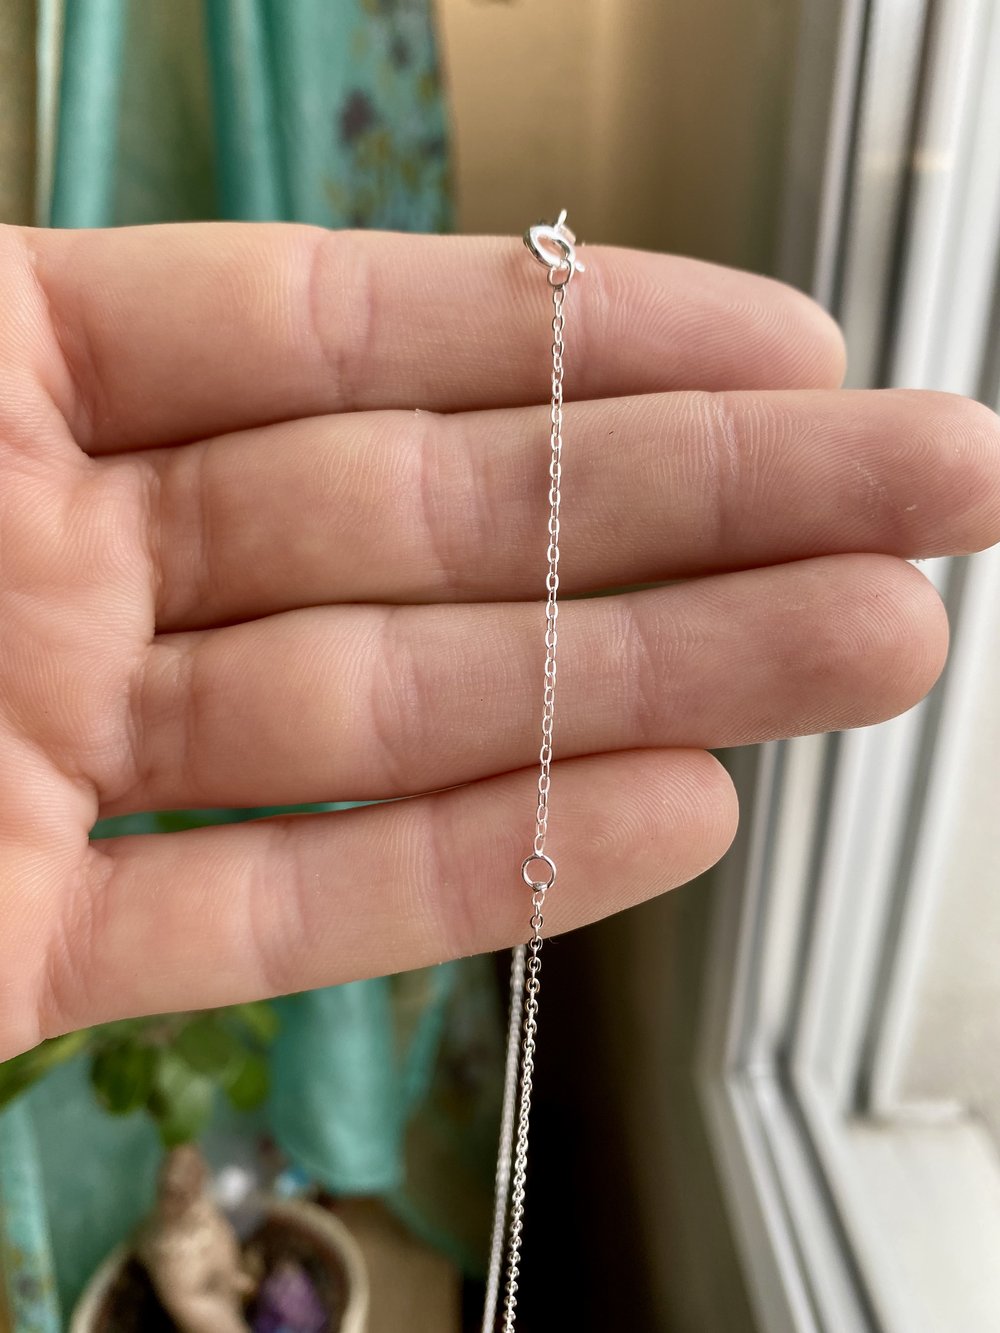 Thin Curb Chain Necklace made of Sterling Silver - Silvertraits